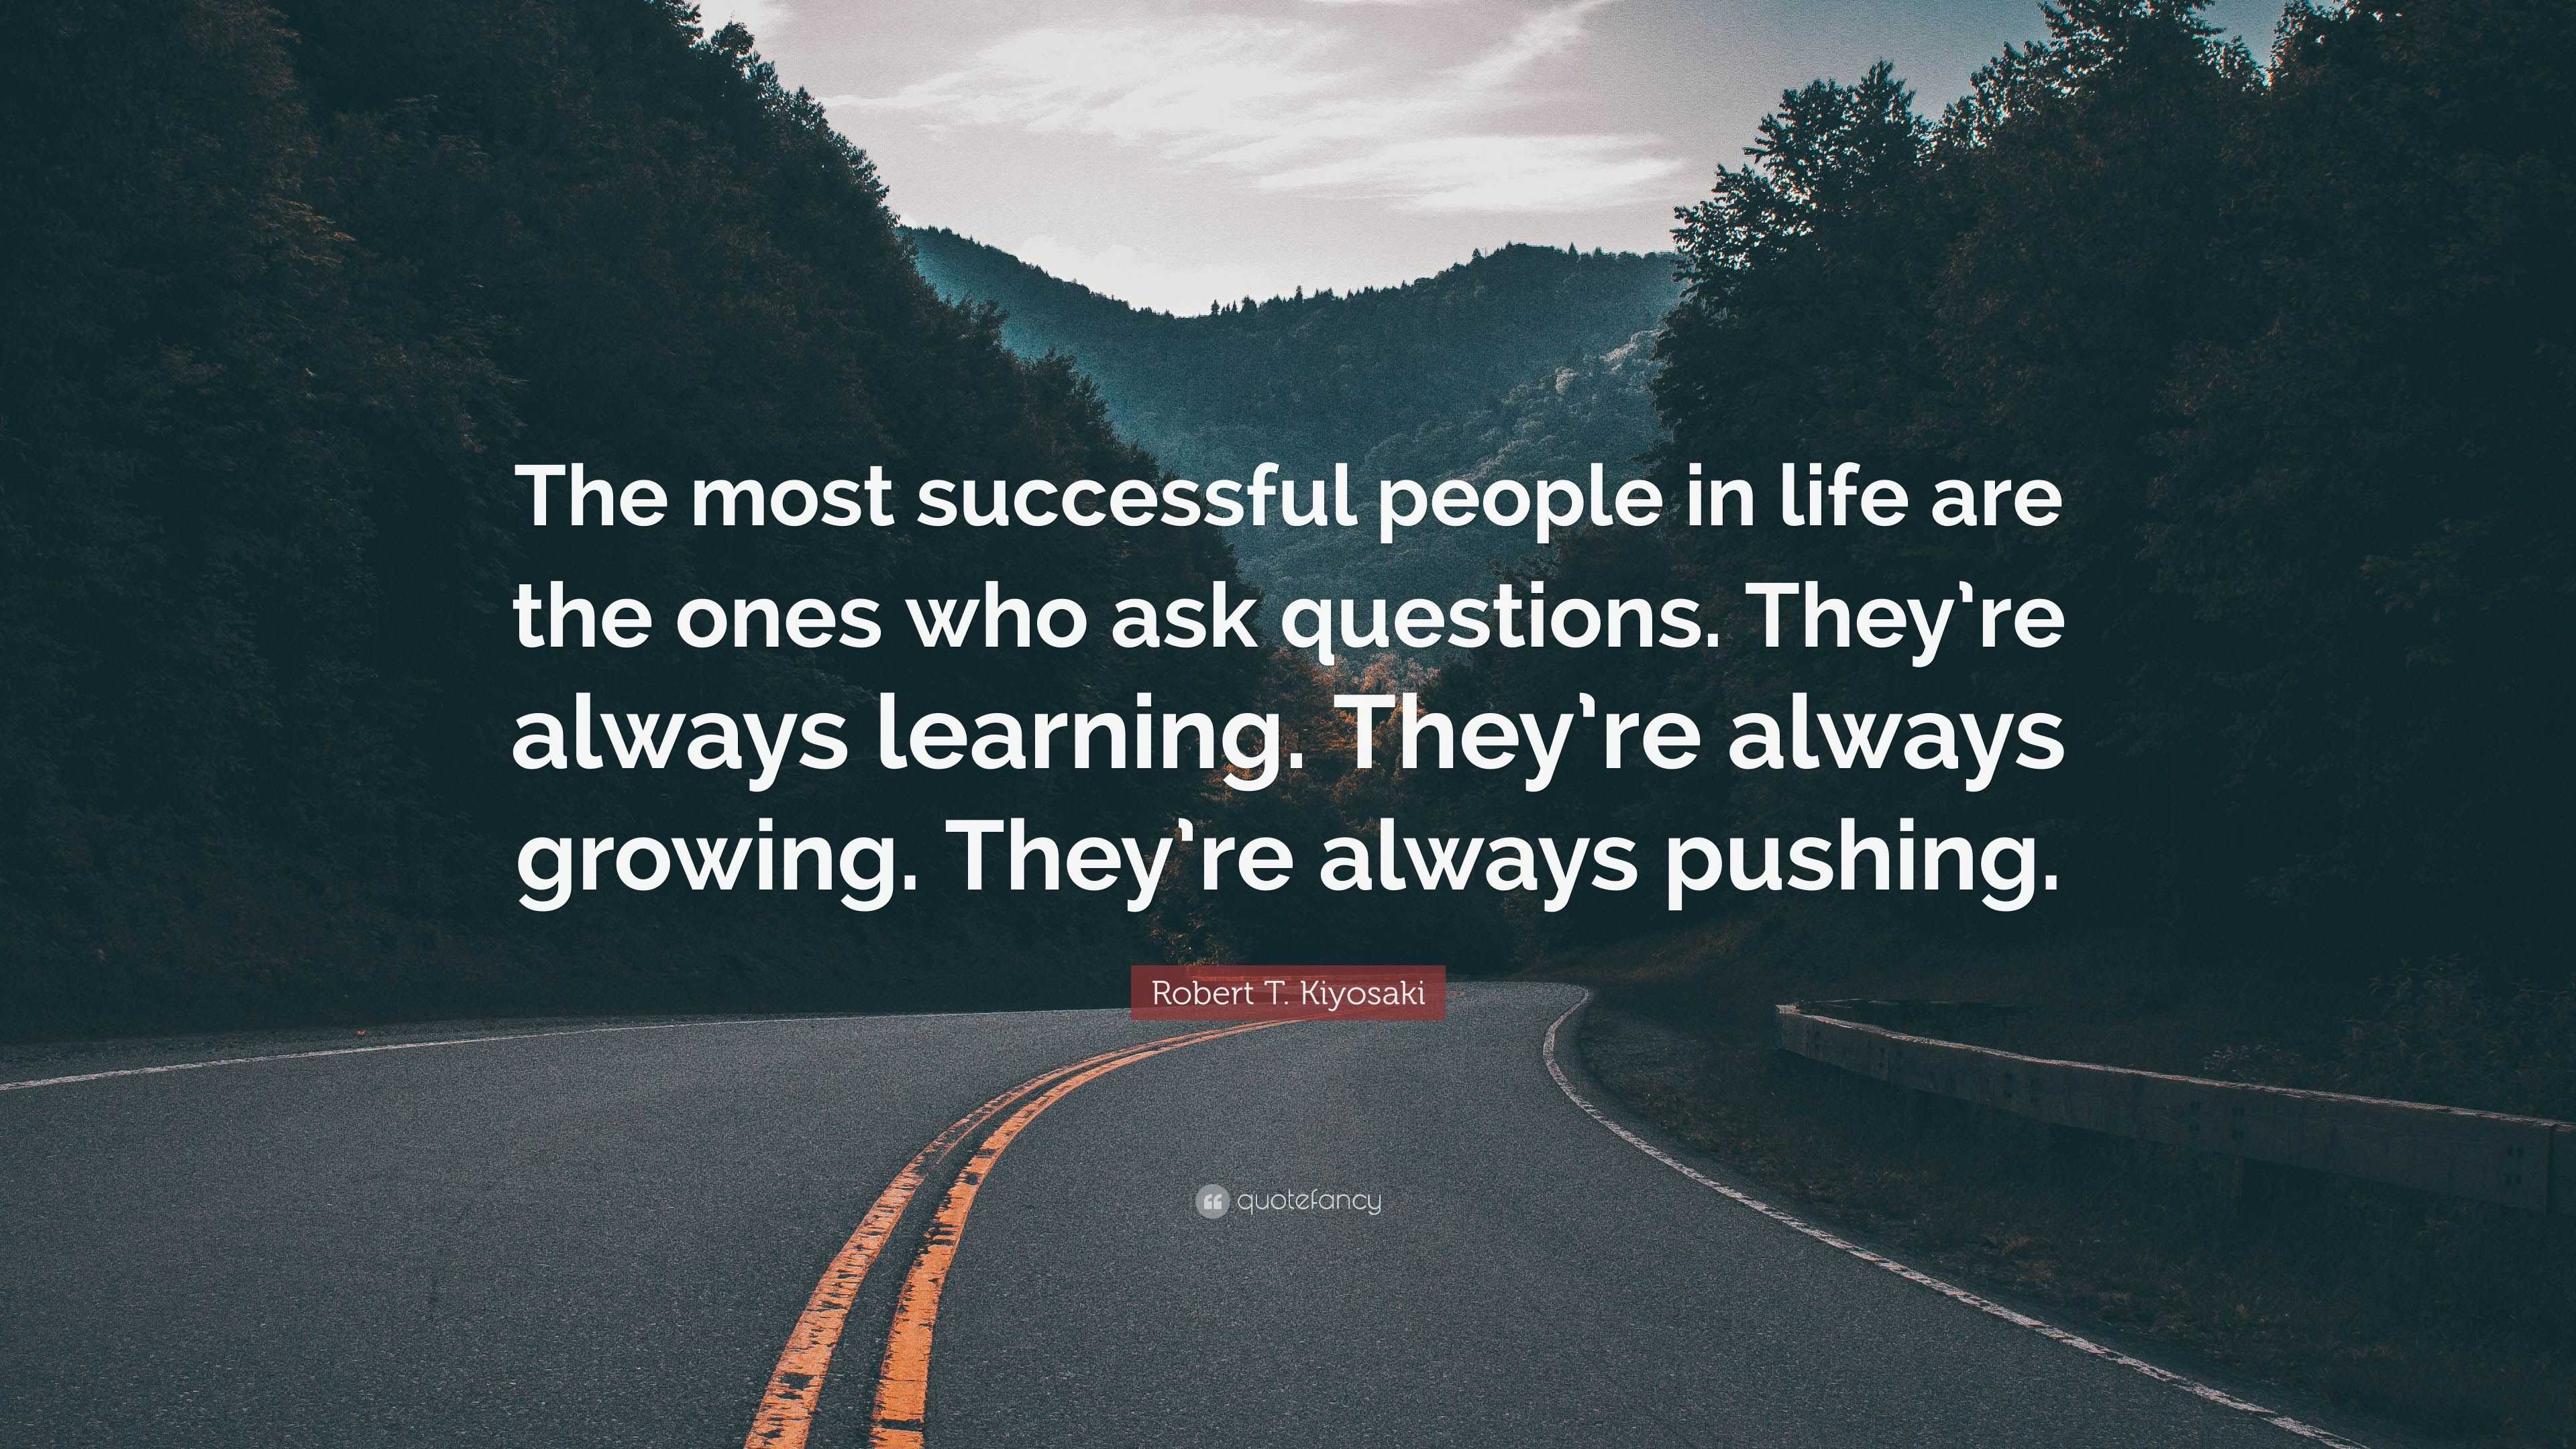 Robert T. Kiyosaki Quote: “The most successful people in life are the